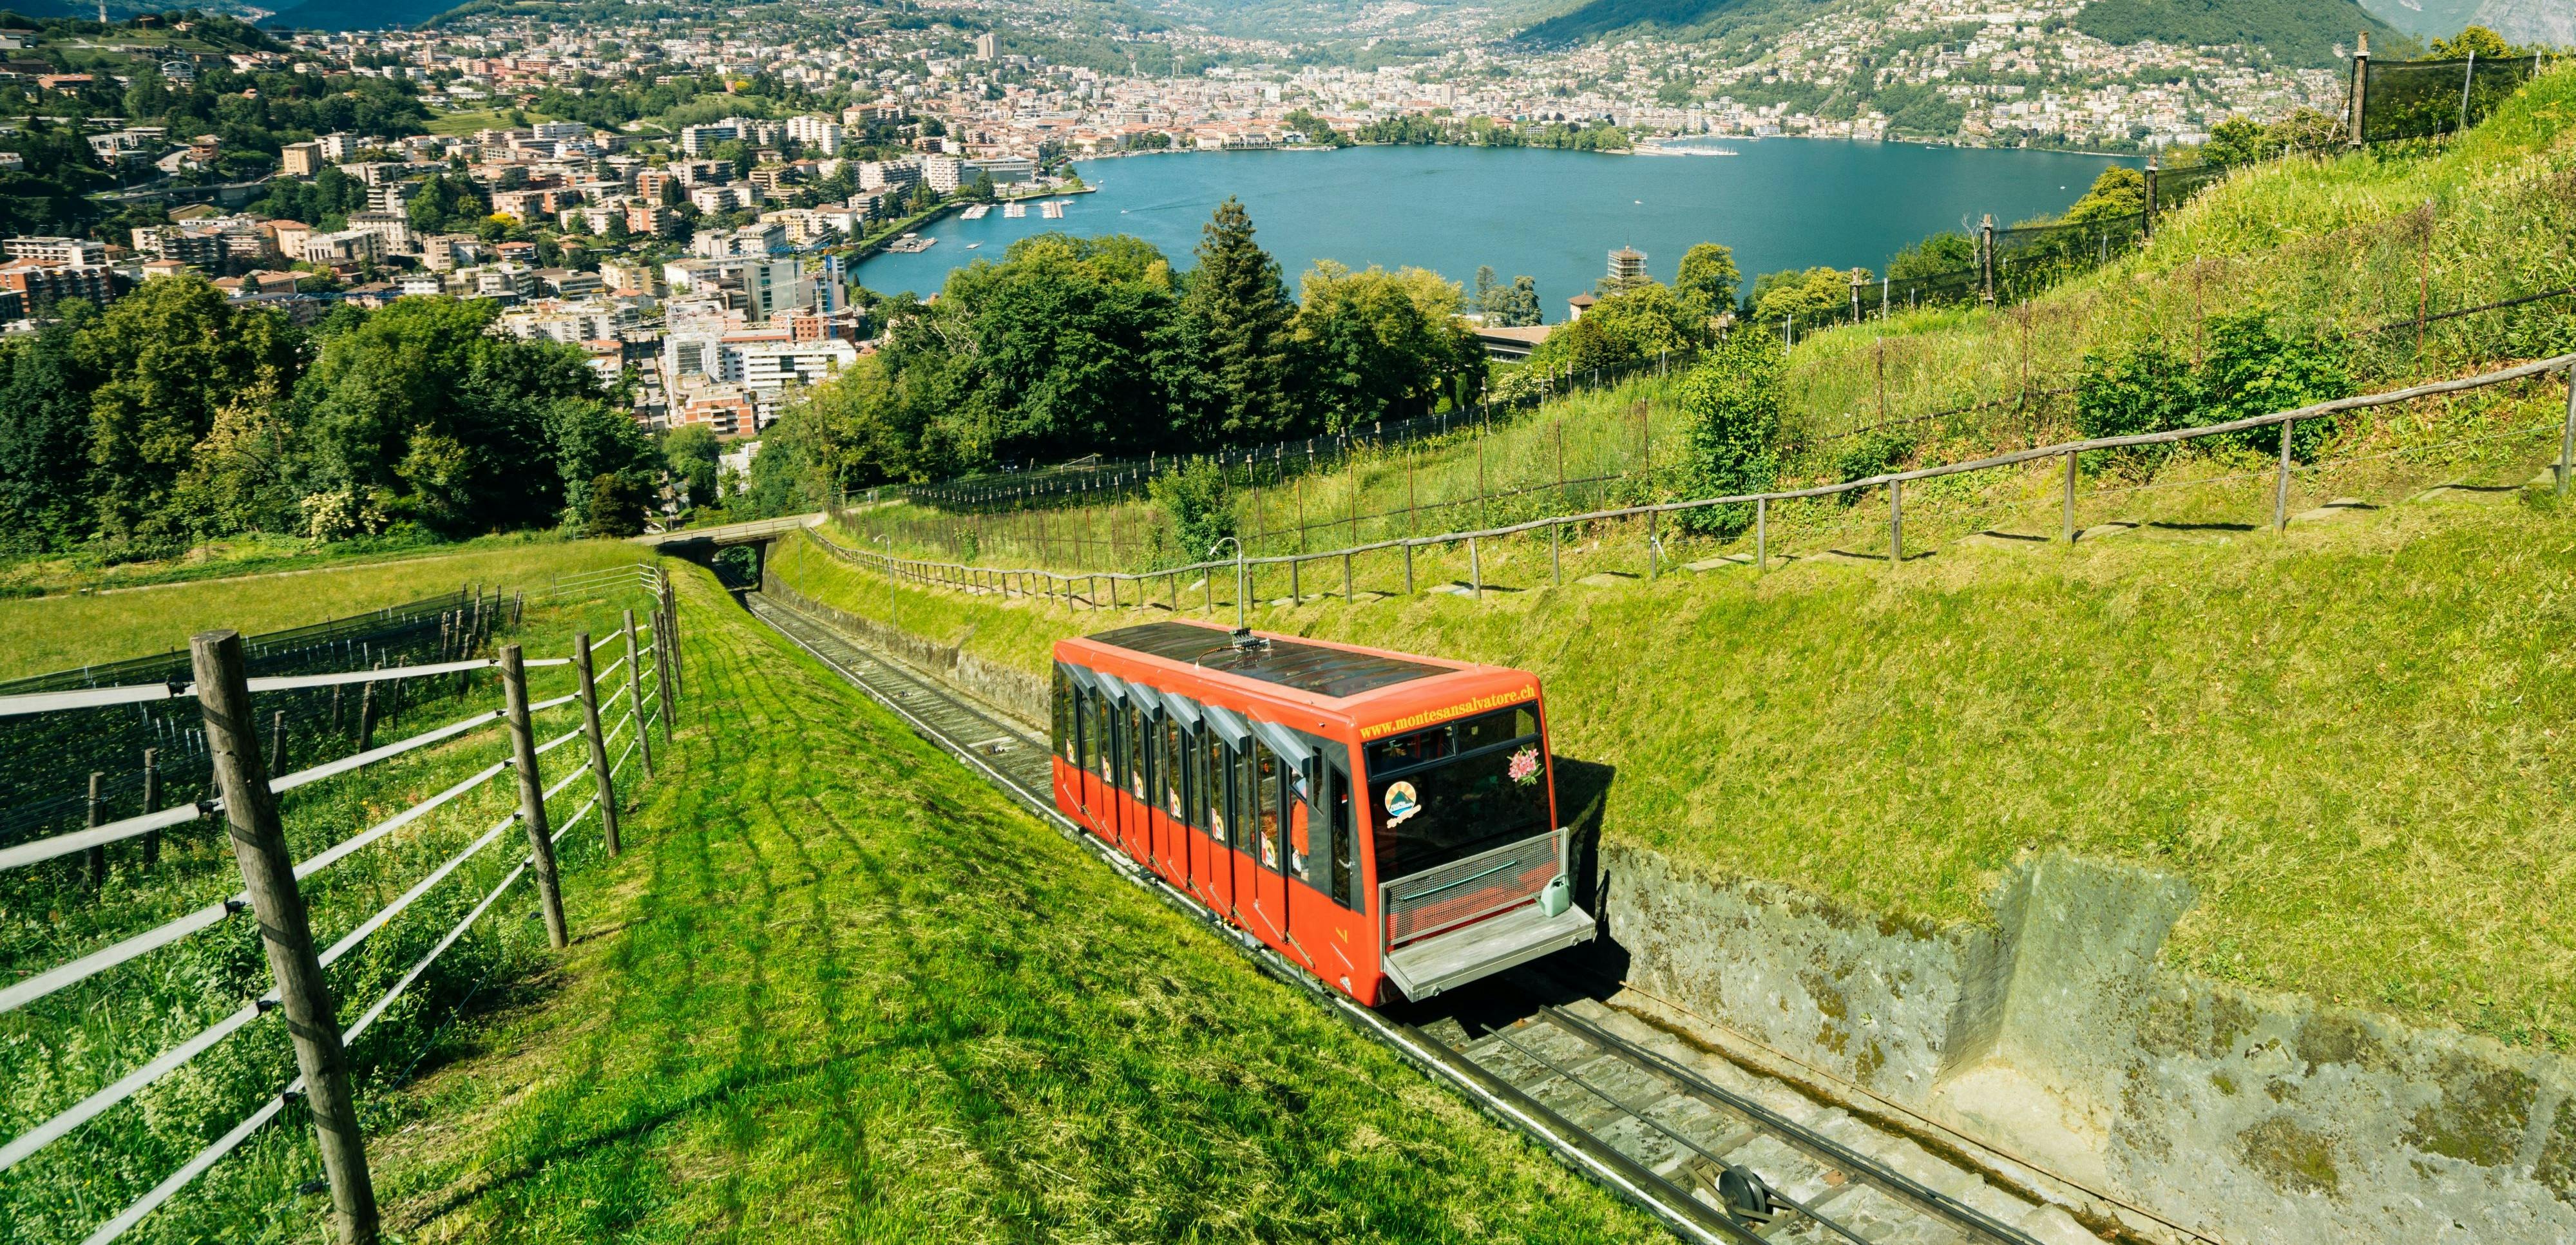 Ticket for Mount San Salvatore funicular and museum